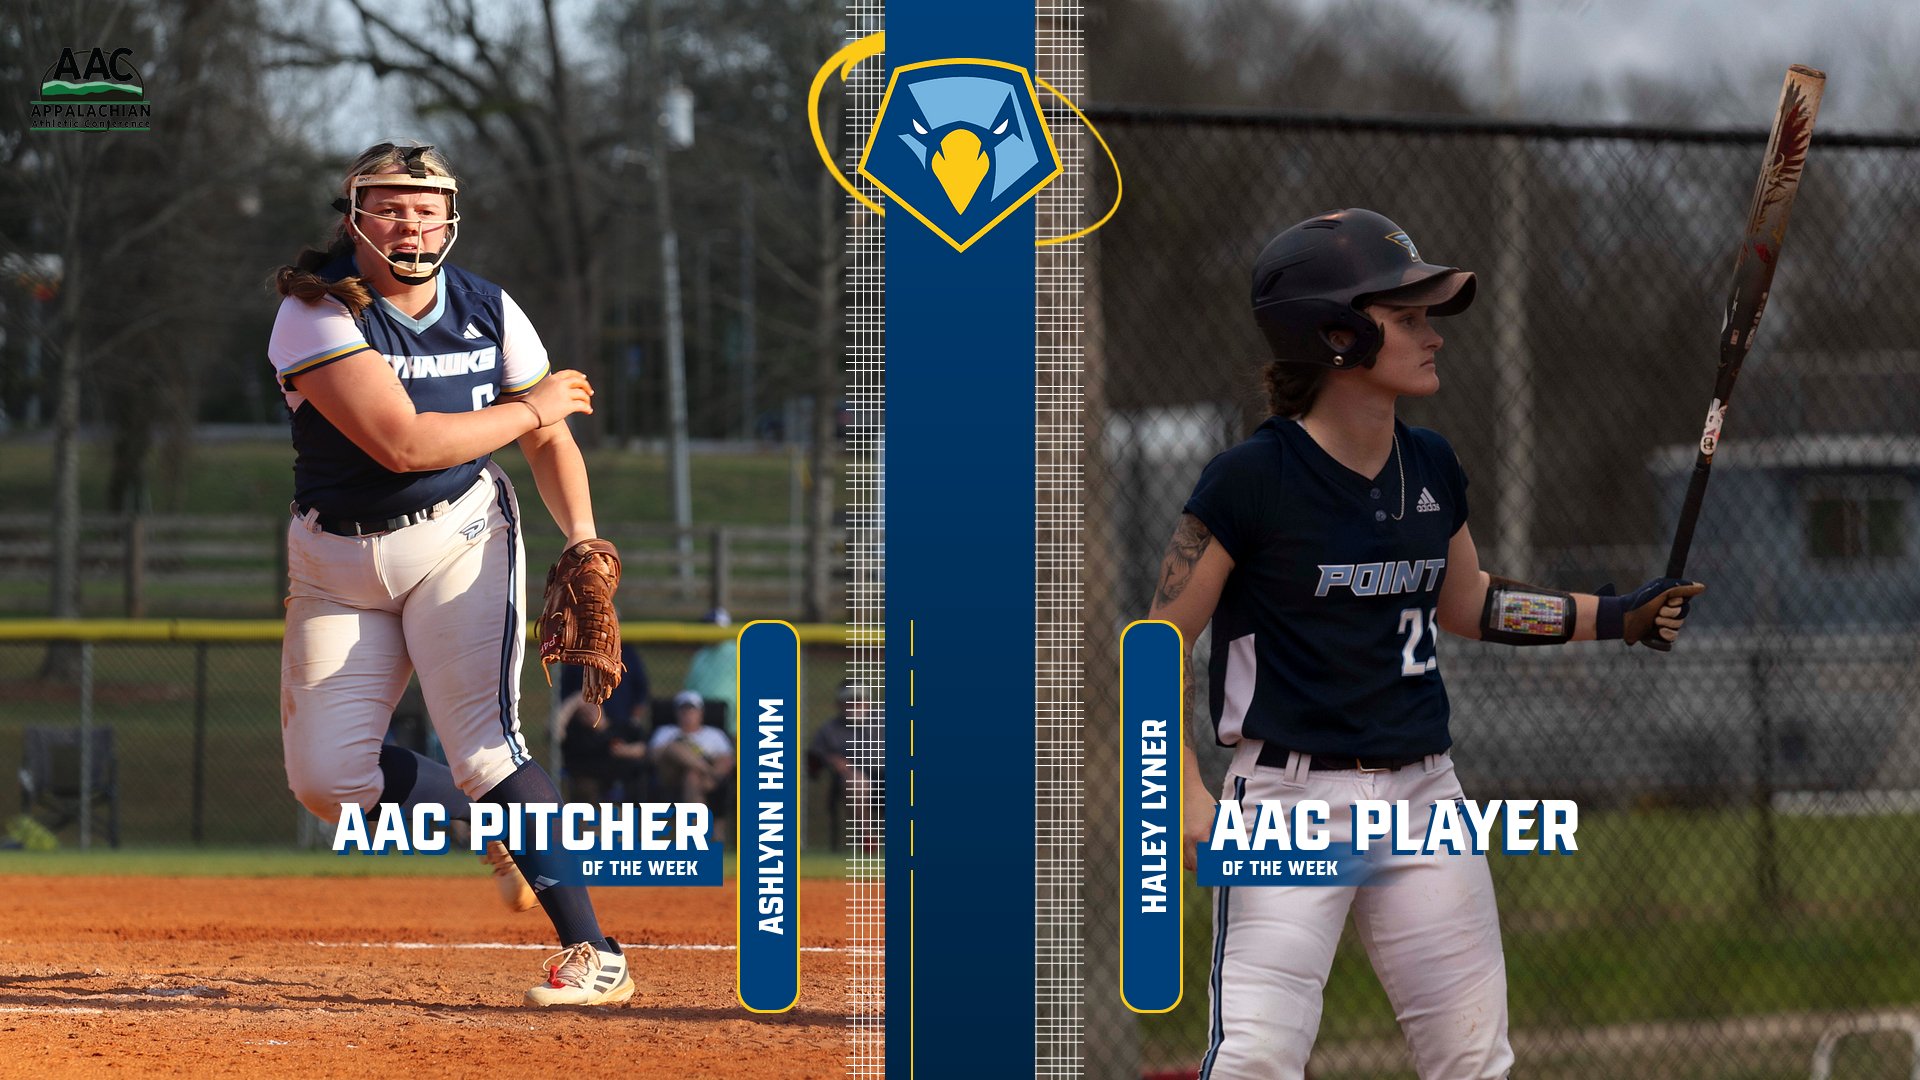 Ashlynn Hamm’s big weekend earns her AAC Pitcher of the Week; Haley Lyner follows with her second AAC Player of the Week honor